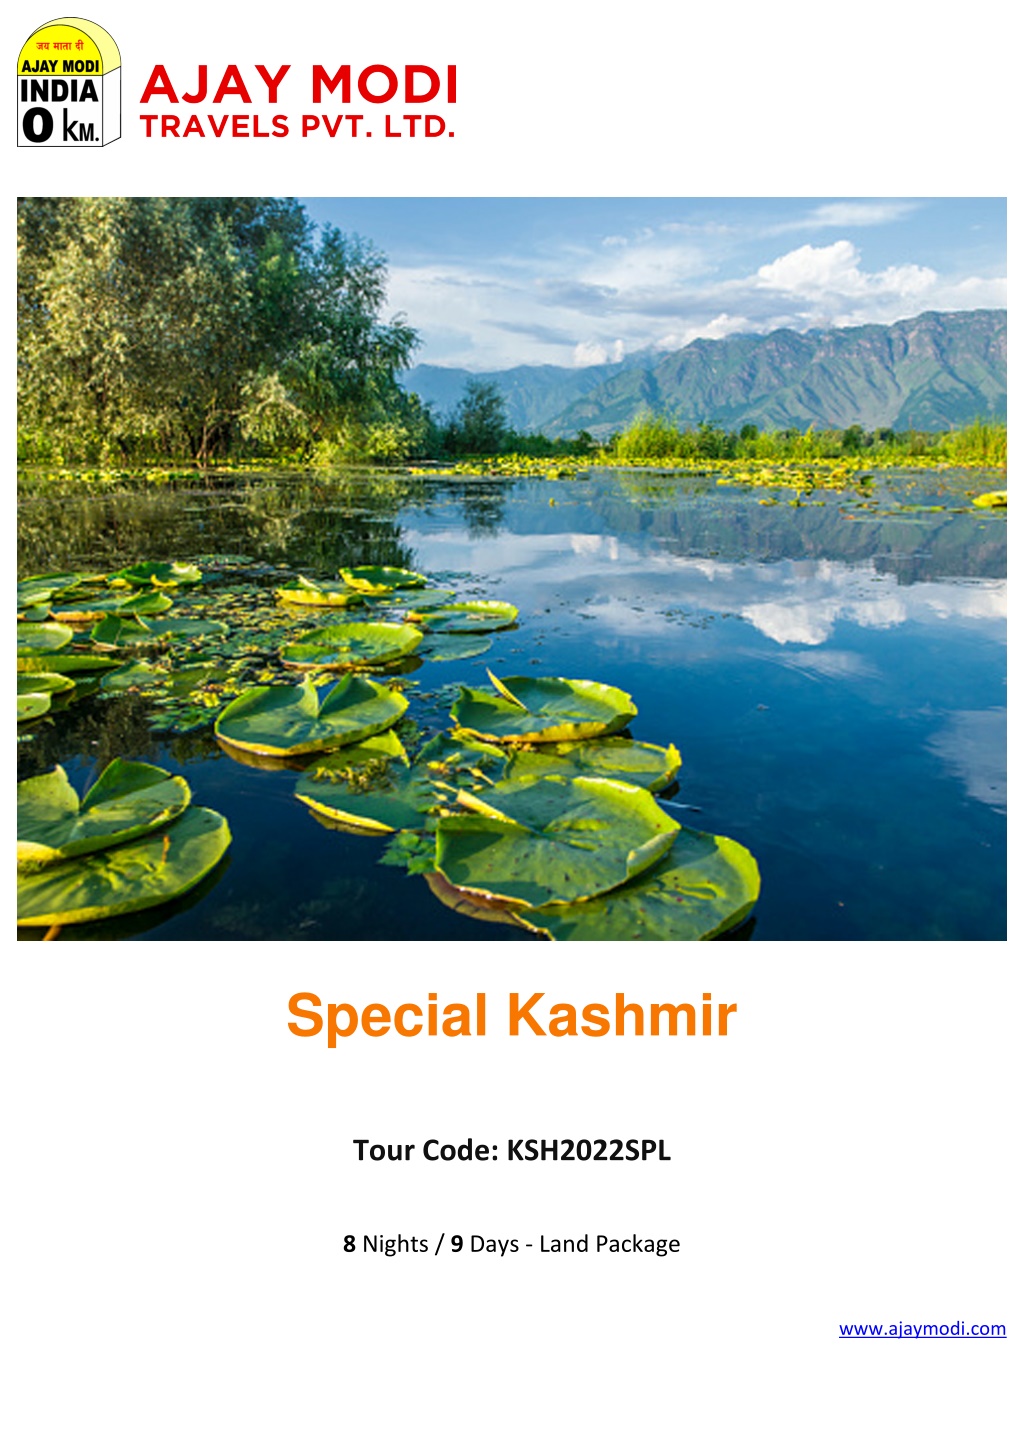 PPT Kashmir Tour Packages at the Best Price Ajay Modi Travels